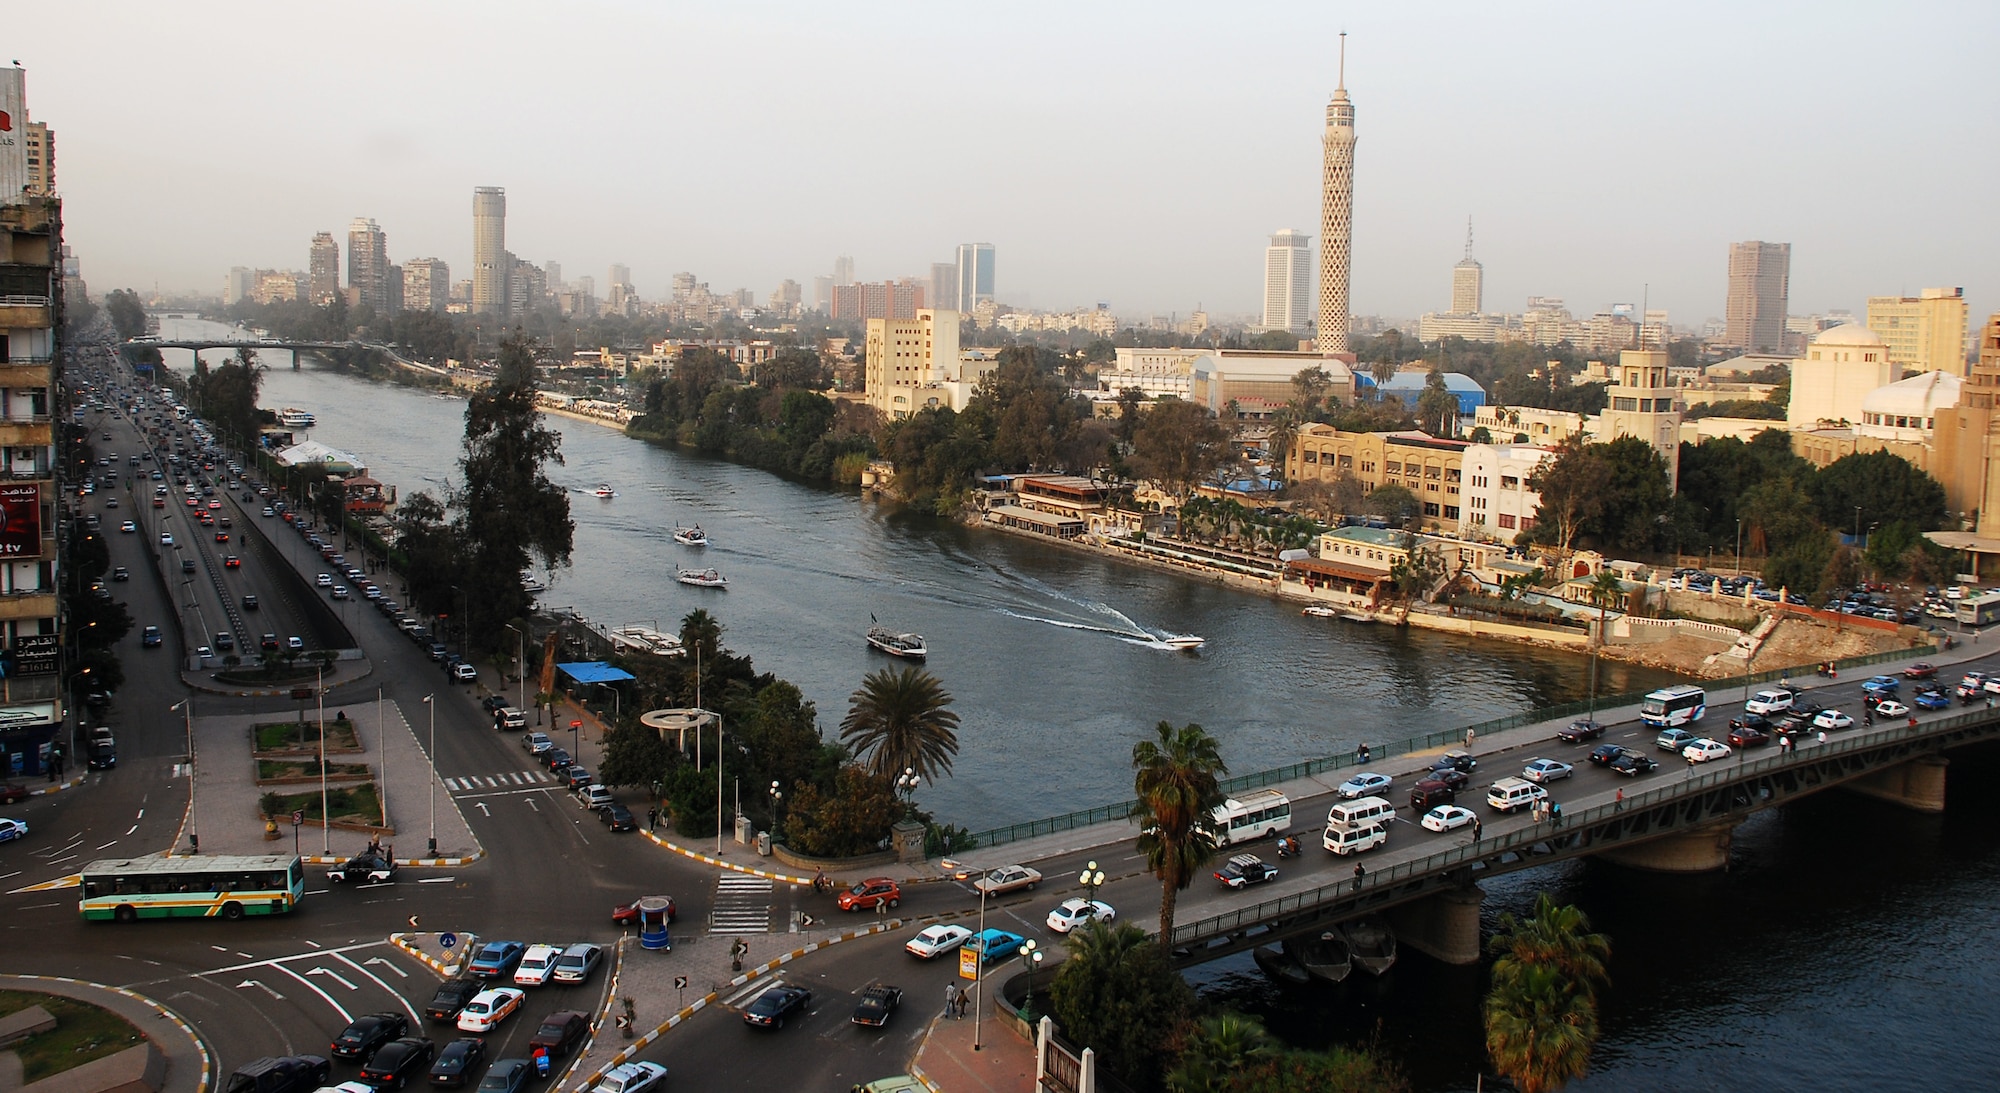 Cars crisscross through the inner city of Cairo Egypt, alongside the Nile River during the day.  Cairo is the capital of Egypt and the largest city in Africa as well as one of the most densely populated cities in the world. Cairo is the center of the region’s political and cultural life and is largely associated with Ancient Egypt due to the proximity of the Great Sphinx and the Pyramids of Giza. (U.S. Air Force photo/Senior Airman Sara Csurilla)